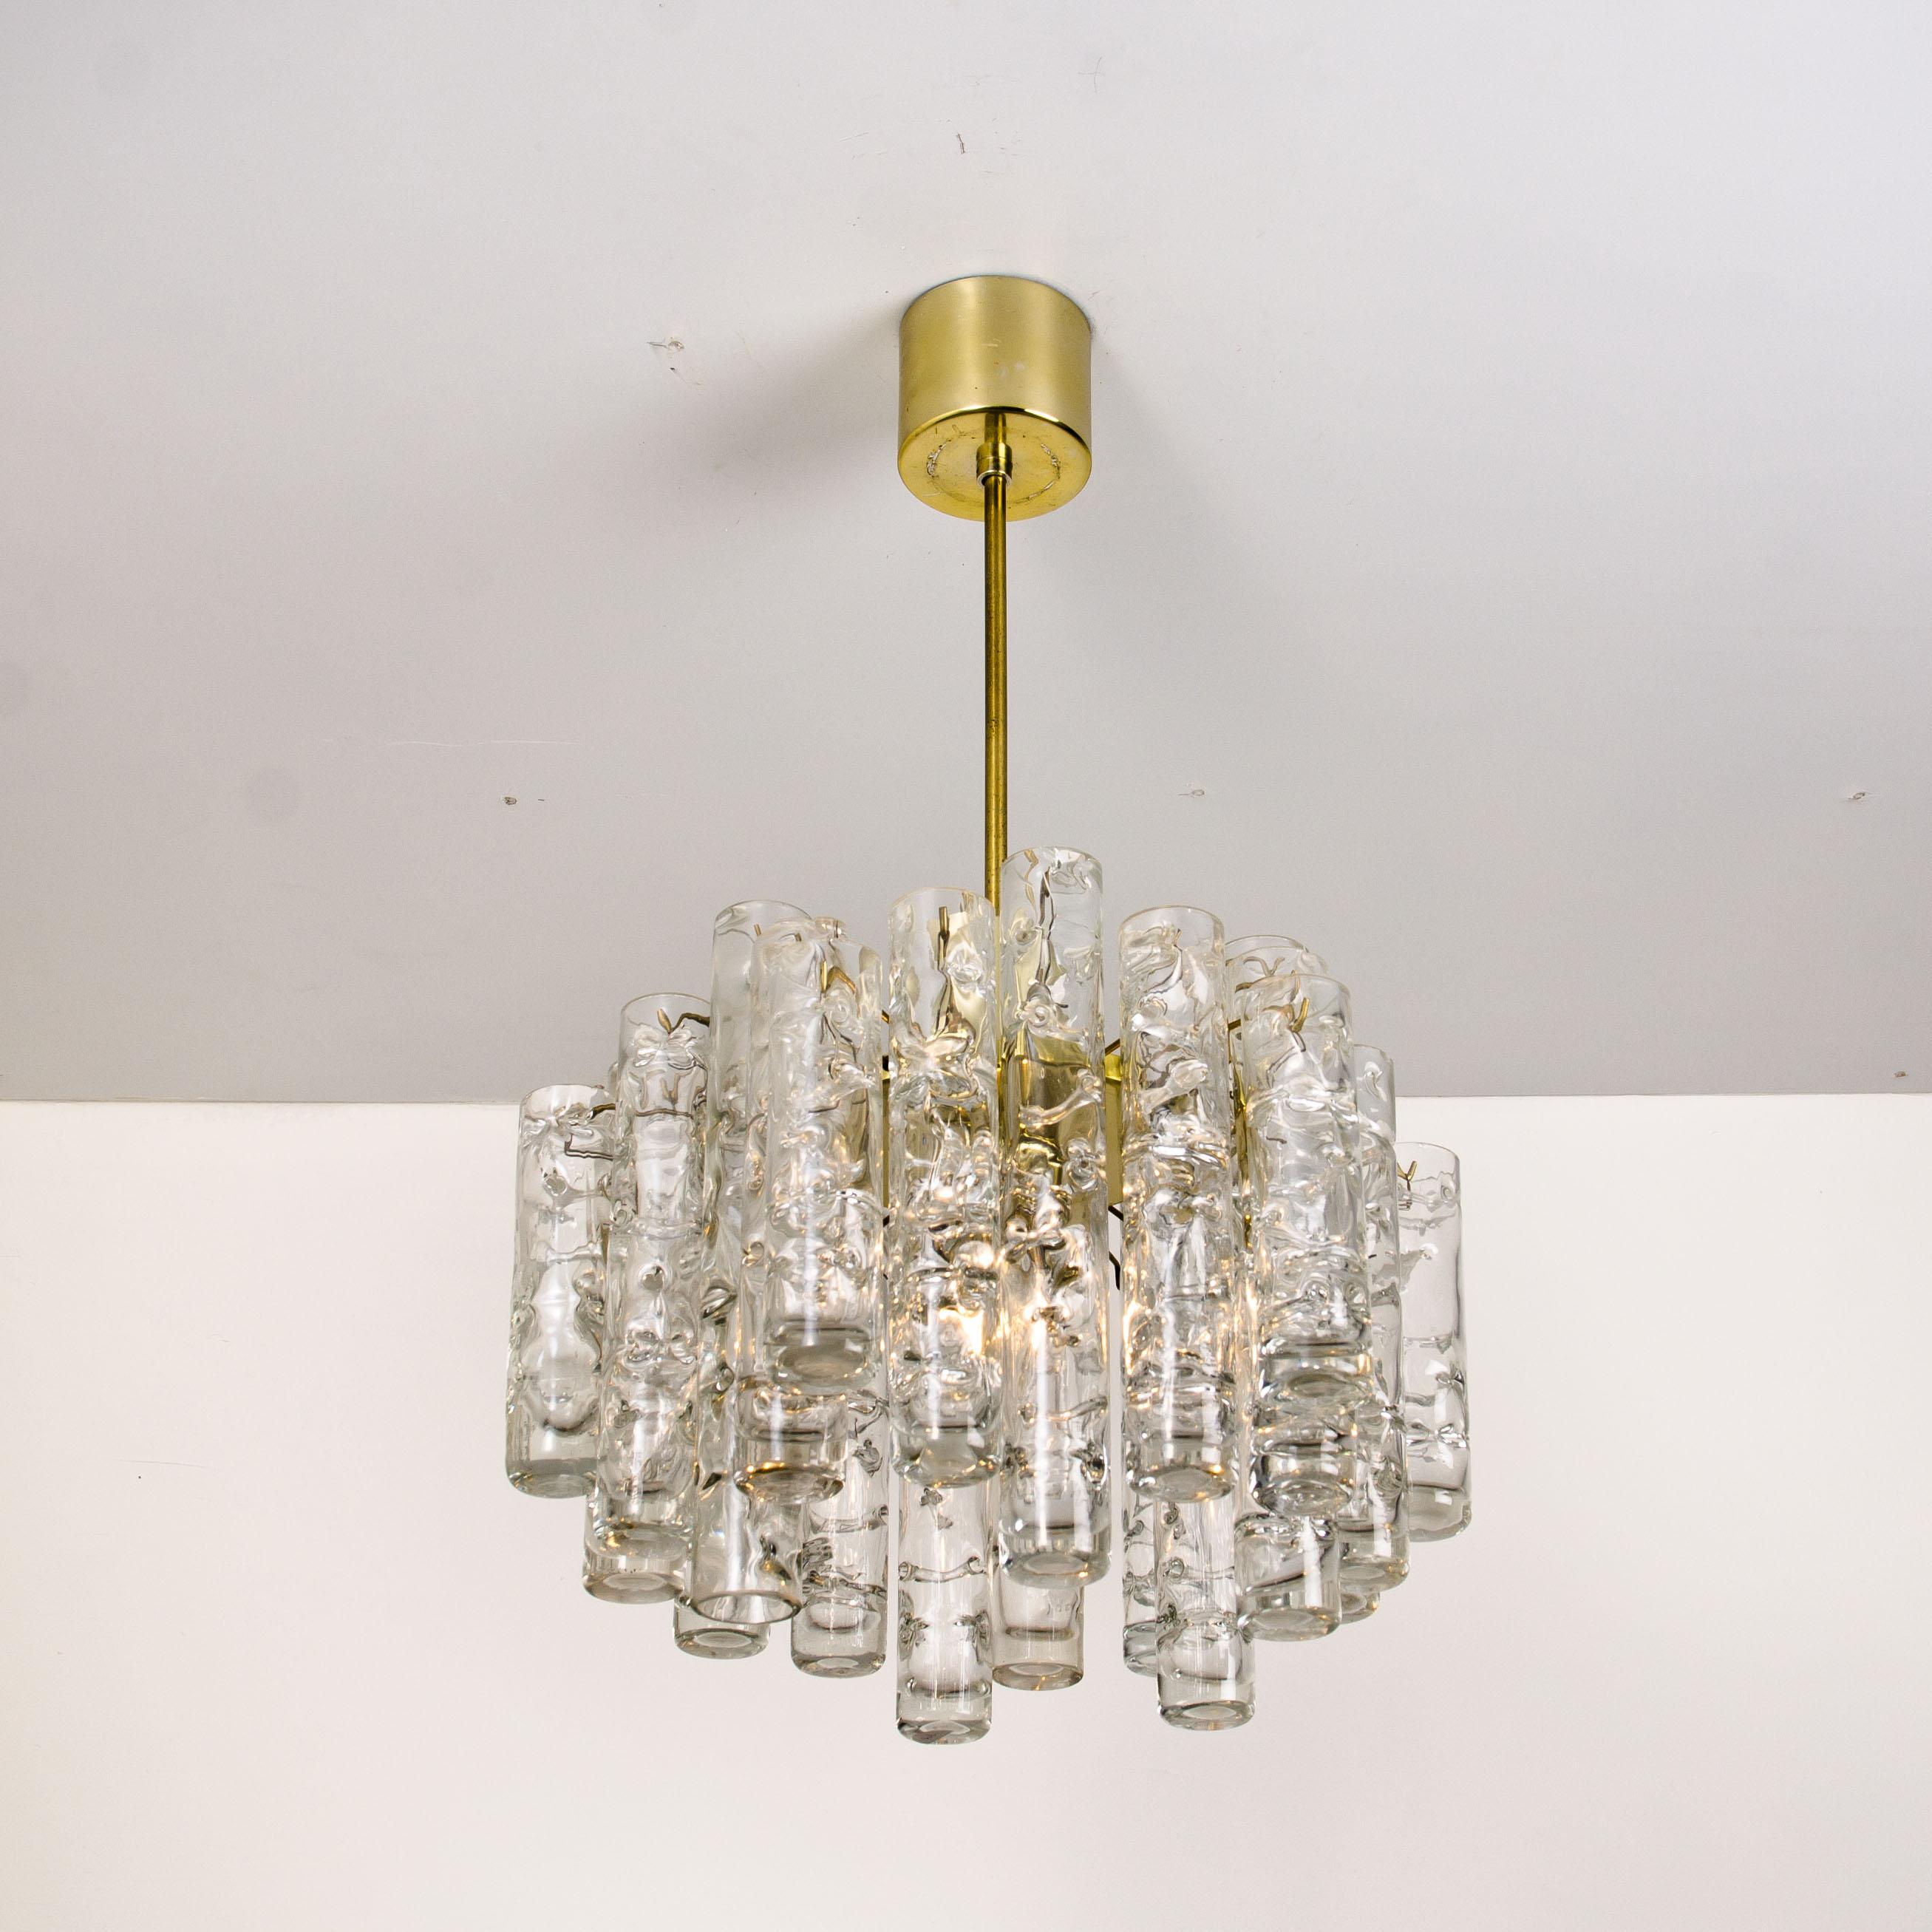 Pair of Doria Wall Lamps in Brass and Glass, 1960s For Sale 5